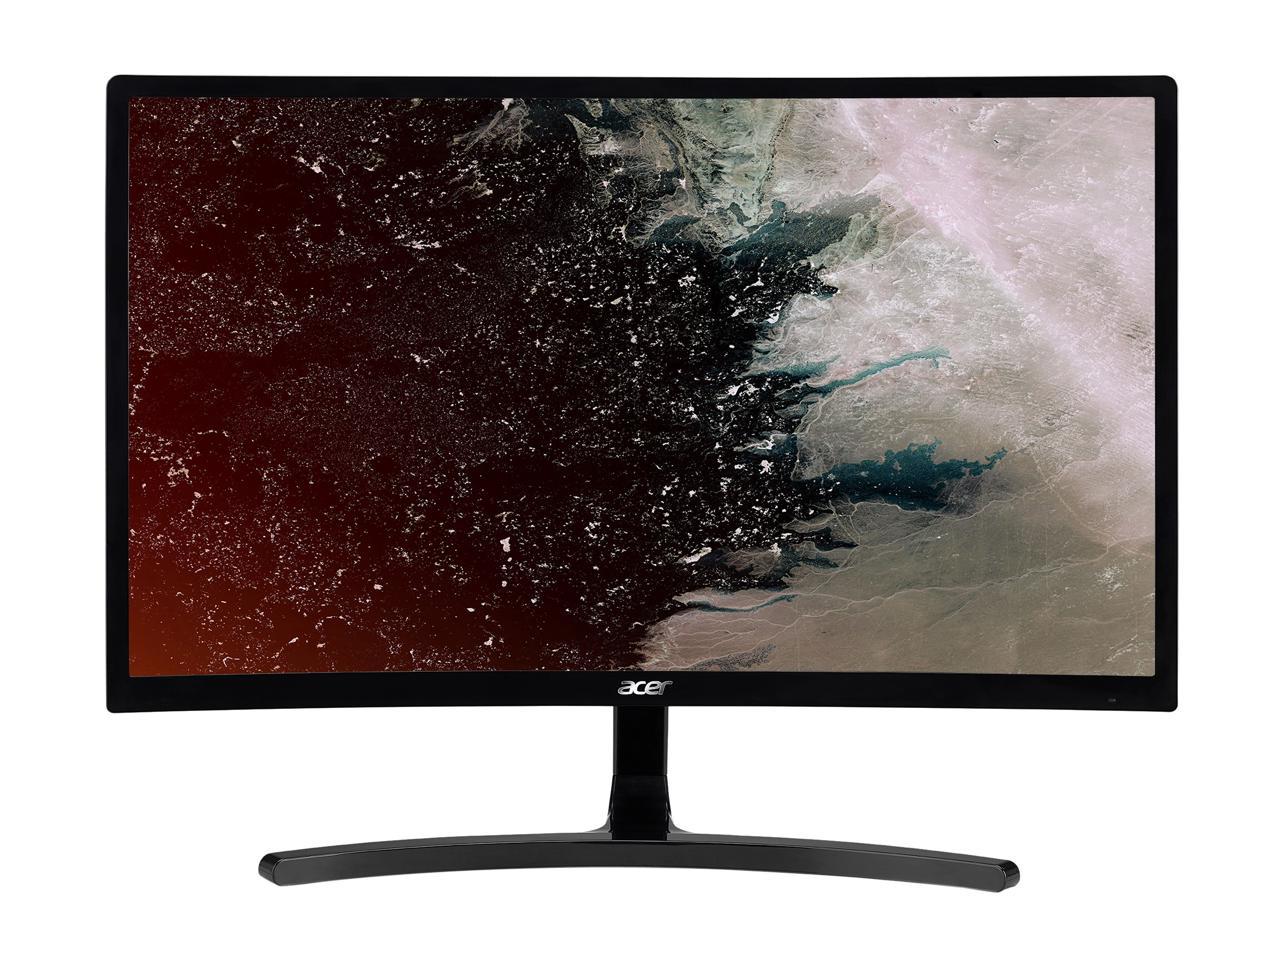 decaan Incubus Leerling Acer ED242QR Abidpx 24" 144Hz LED Curved Gaming Monitor - Newegg.com